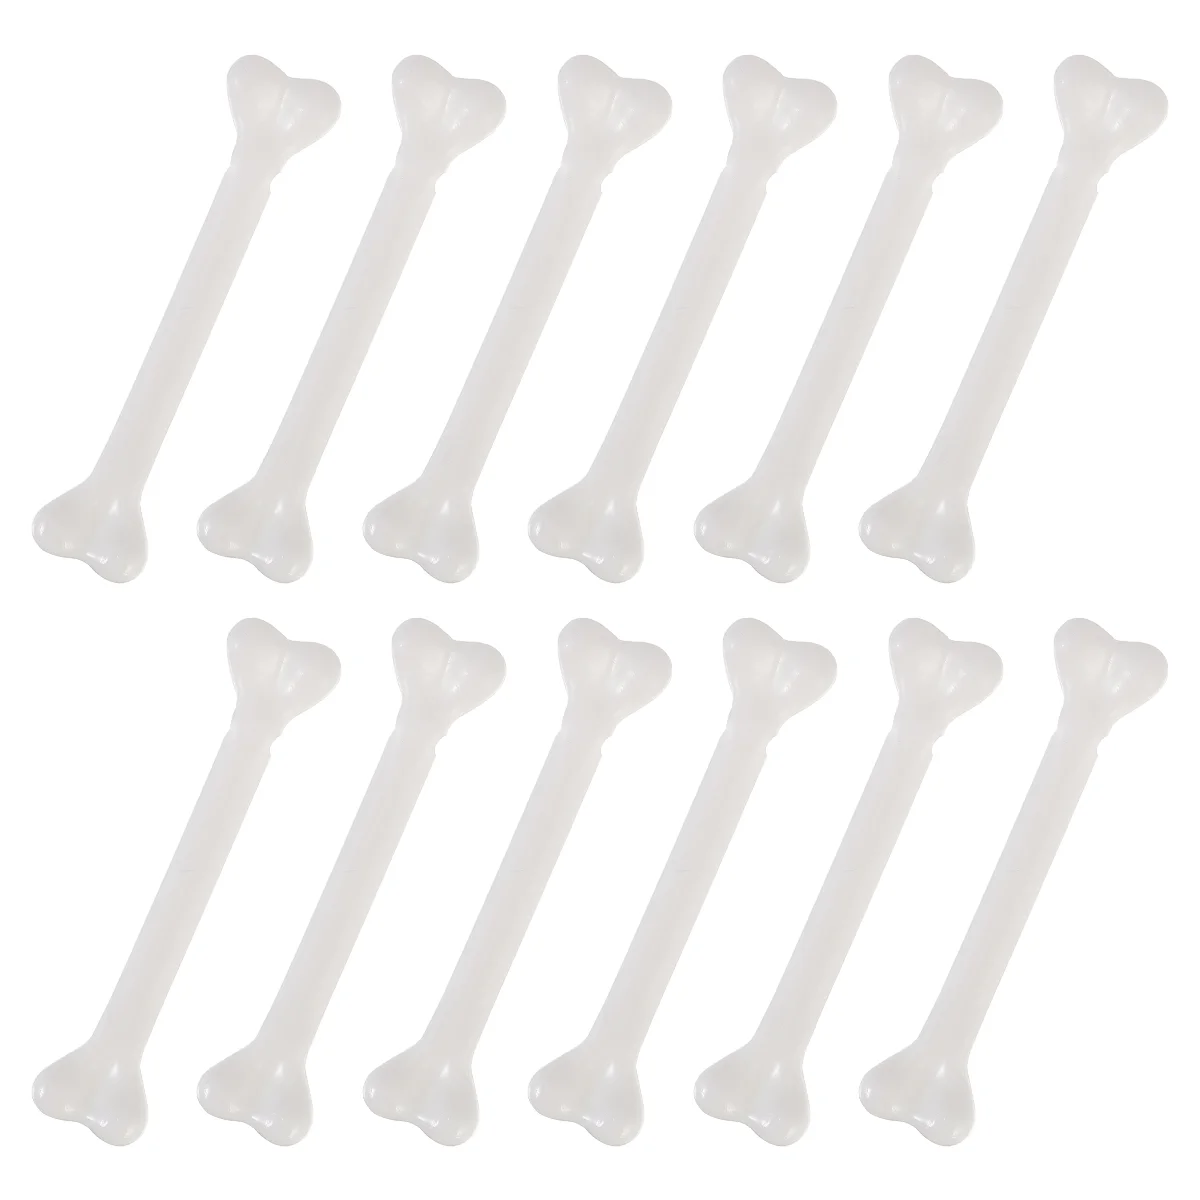 Bones Halloween Bone Plastic Props Costume Decor Decoration Human Adornment Party Dog Fake Model White Haunted Accessories House halloween bloody apron handprint tablecloth tableware decoration horror role playing props haunted house holiday party supplies